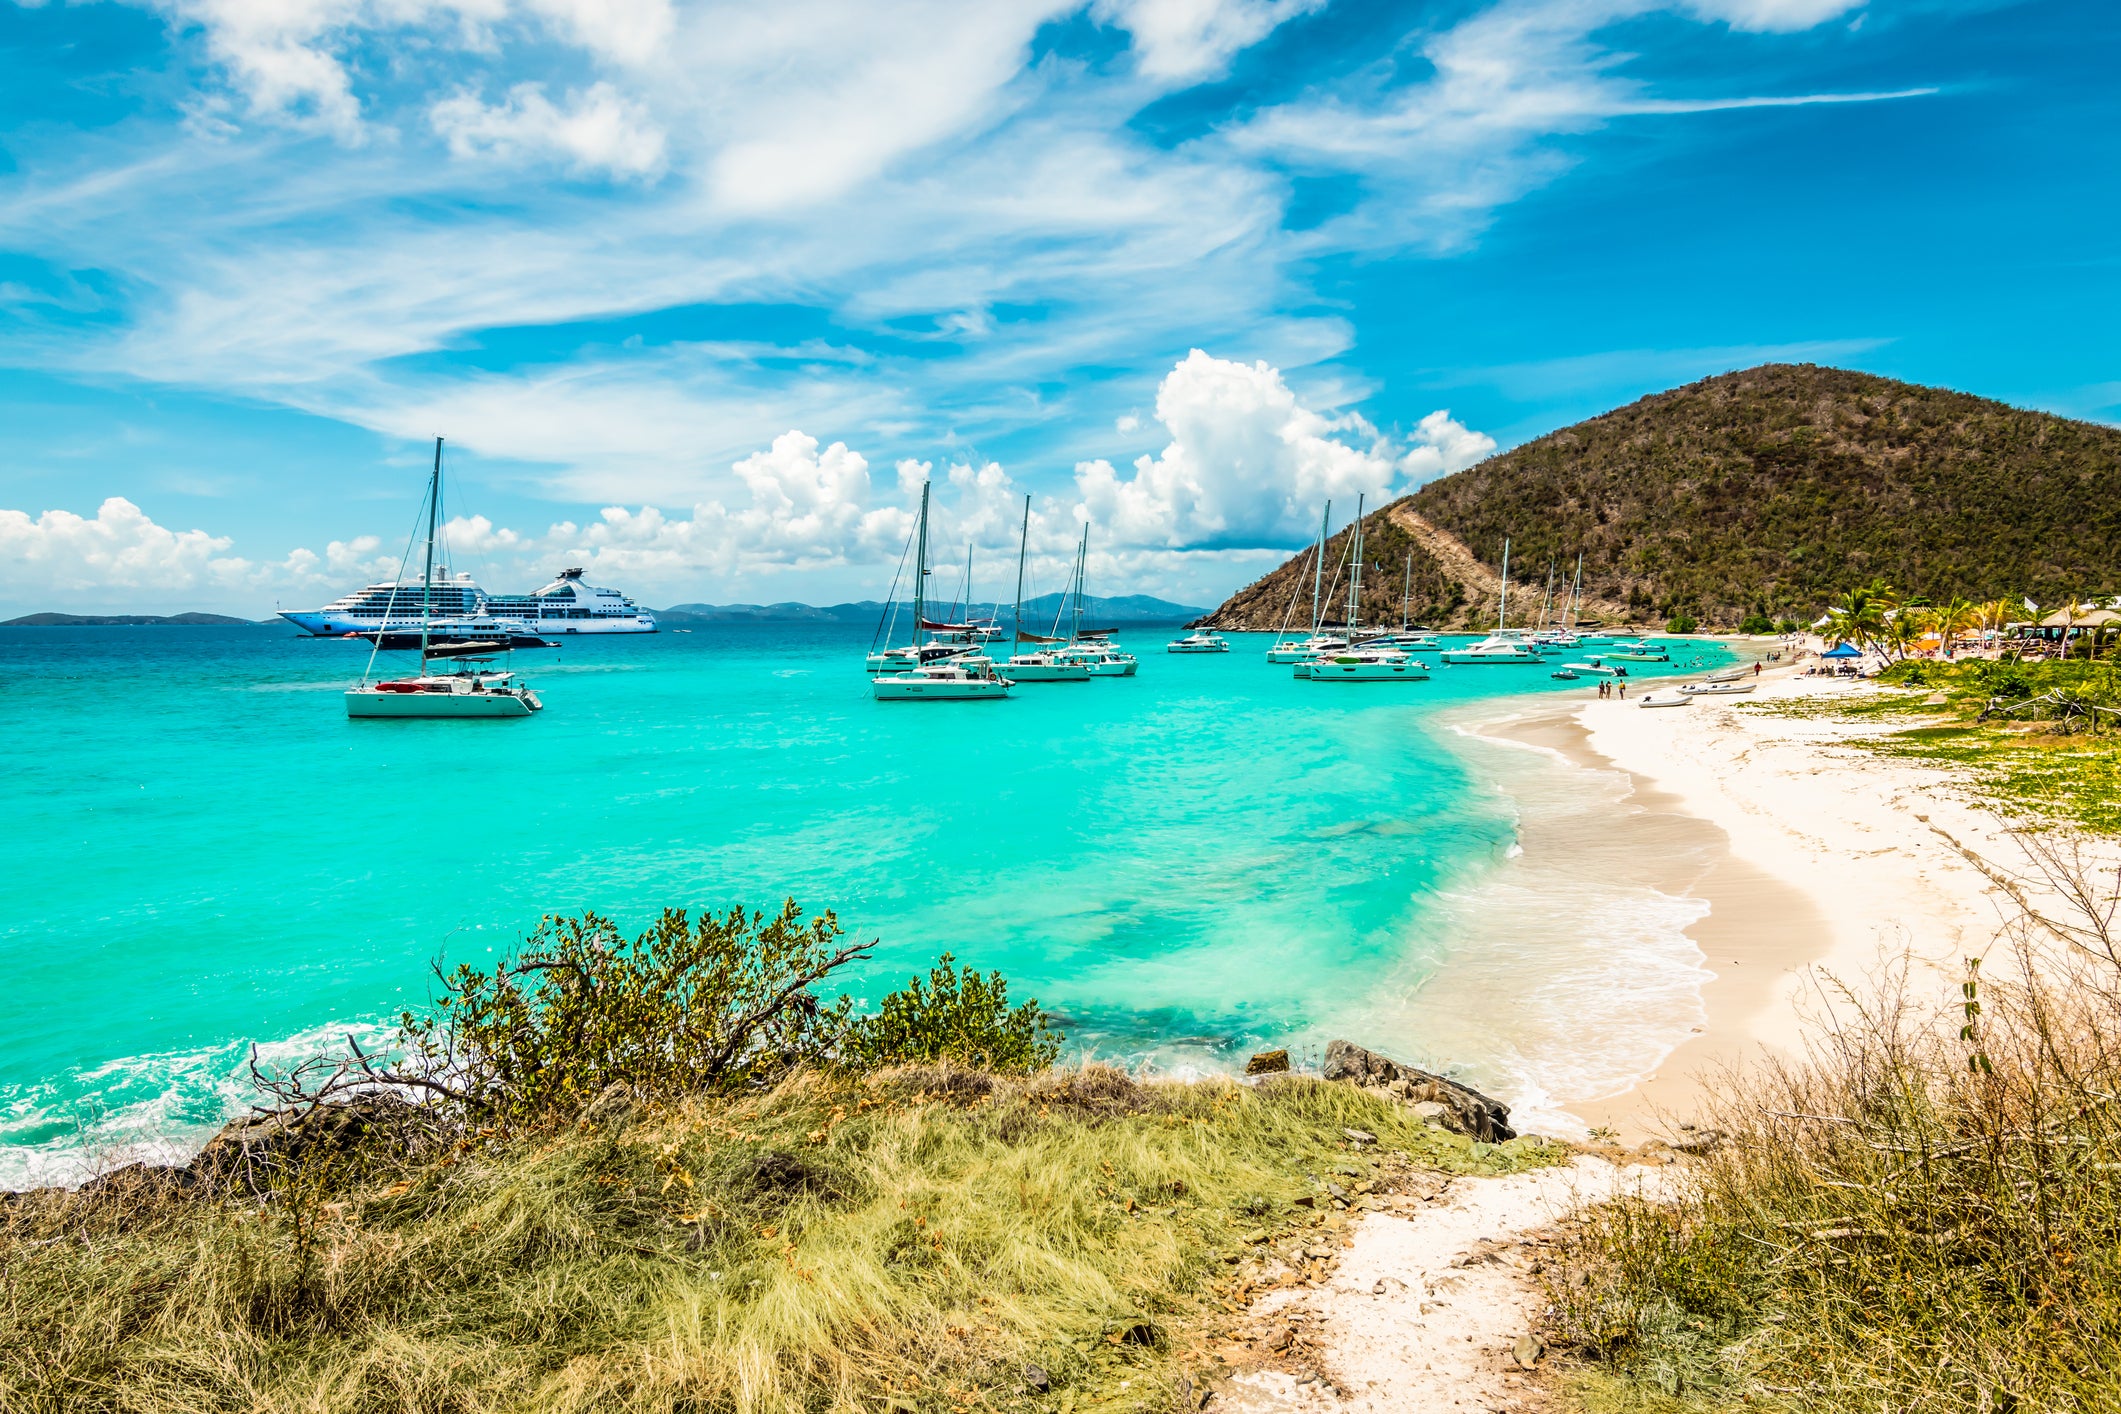 Sail to the beat of the 1980s as you travel to Jost Van Dyke